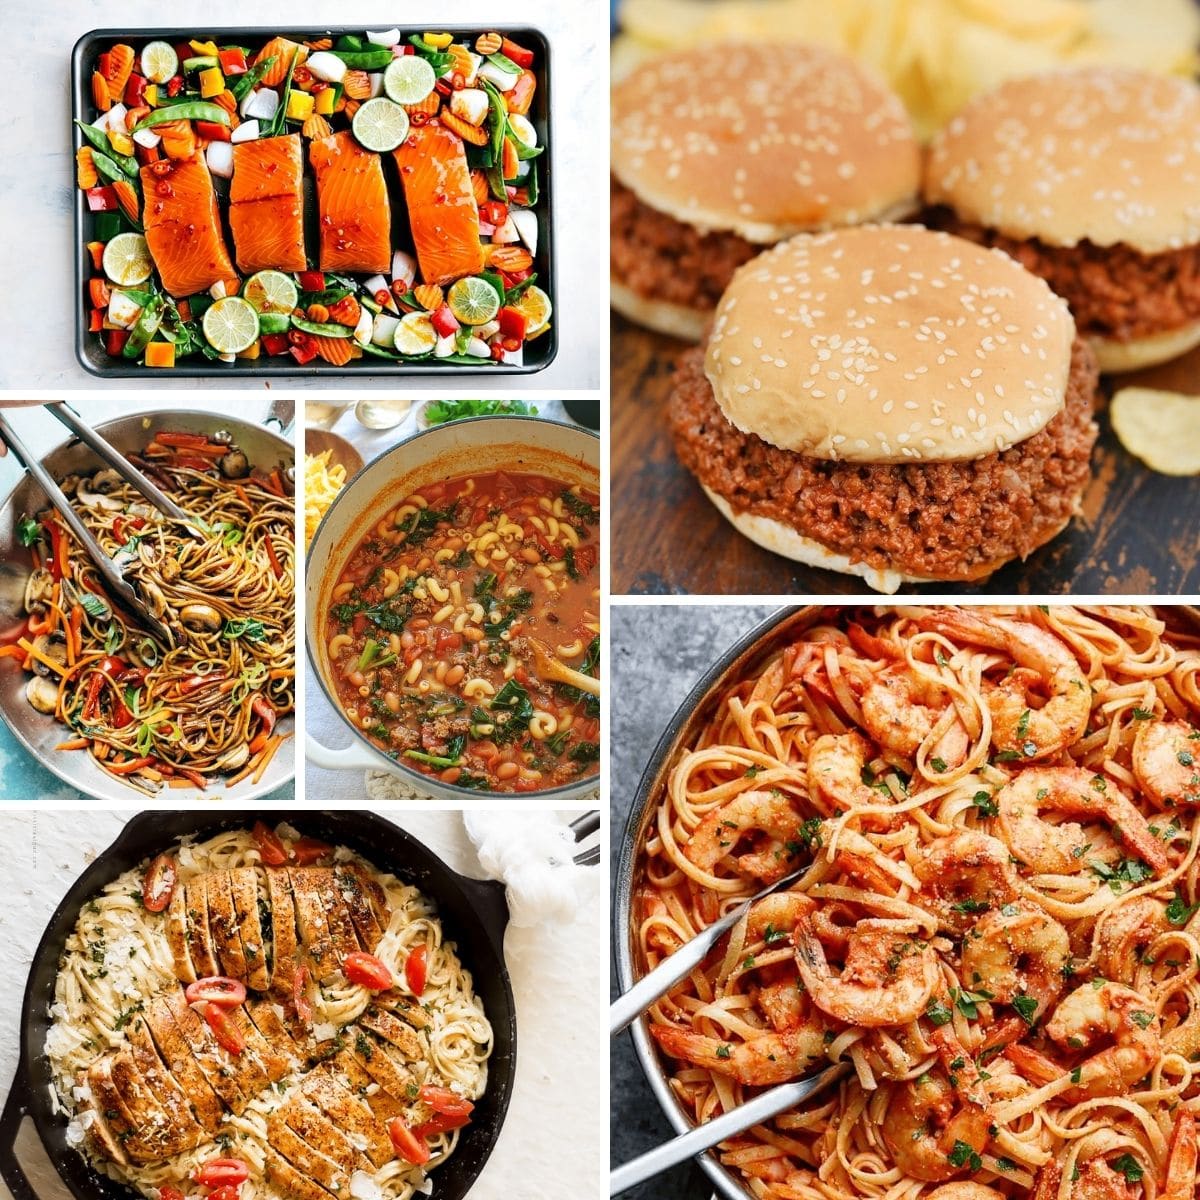 Collage image of foods including salmon on tray sloppy joes and pasta with shrimp